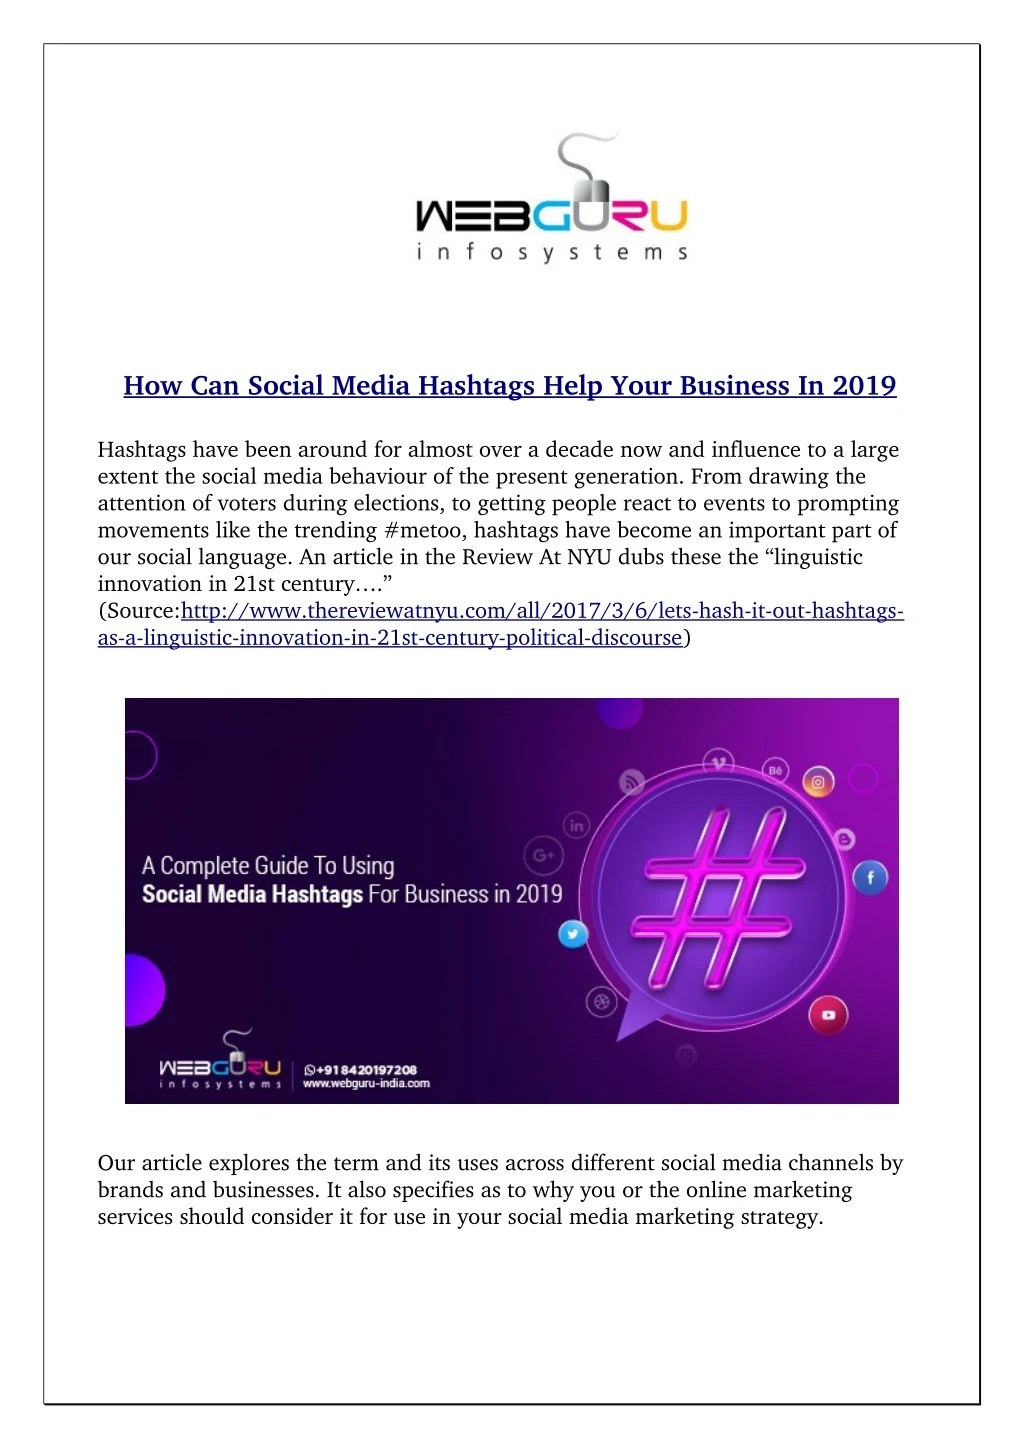 how can social media hashtags help your business